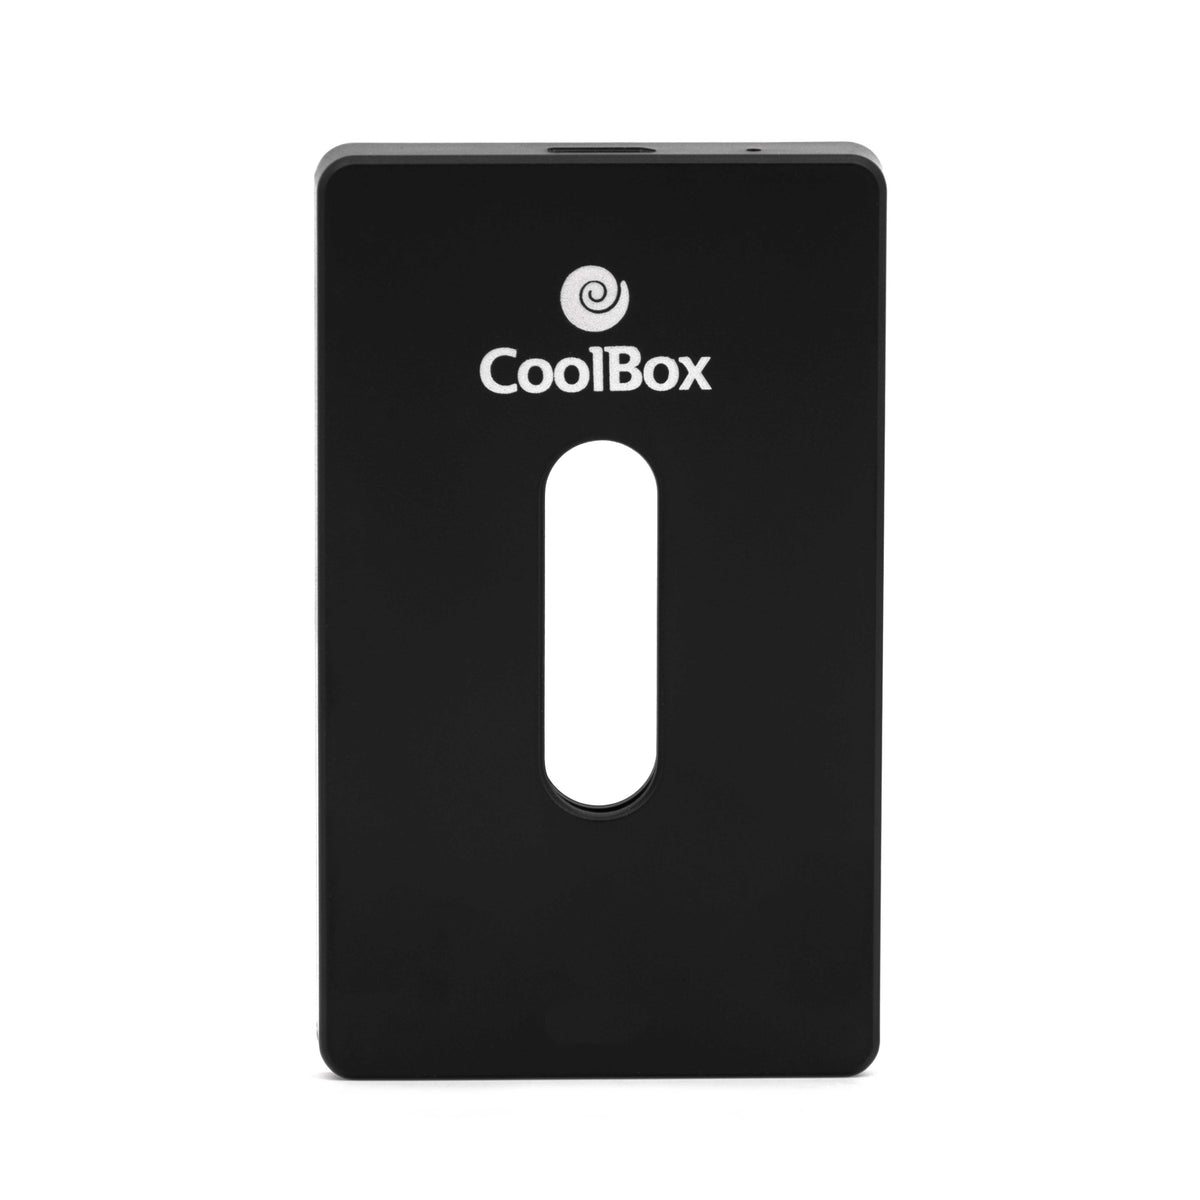 Box for external disk 2.5 7mm CoolBox S-2533 SLOT-IN USB 3.0 Black